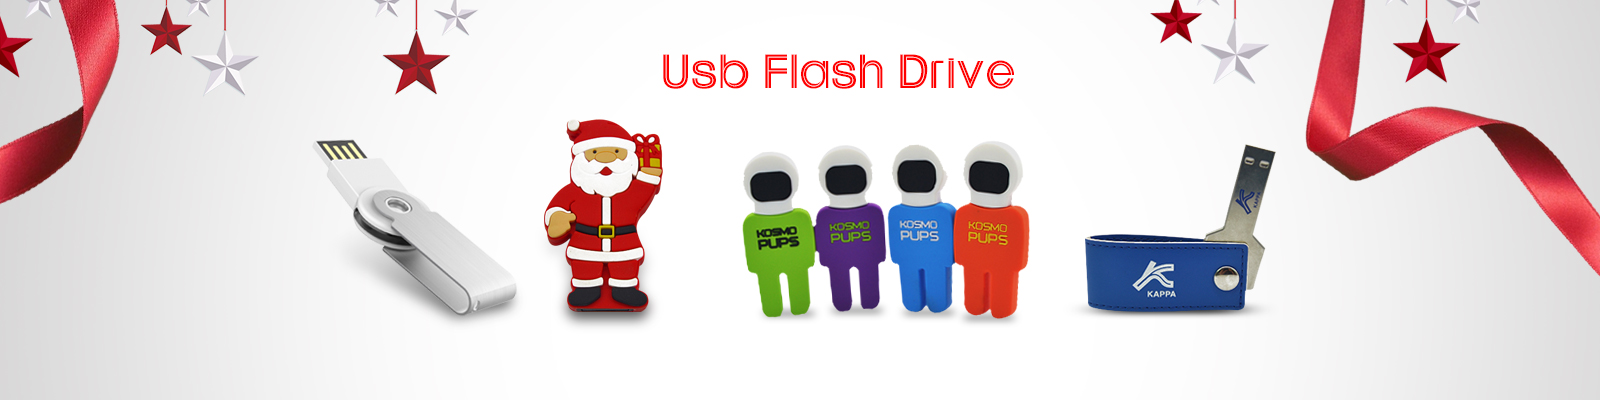 Usb flash disk | Plastic case usb flash drive | leadway group limited